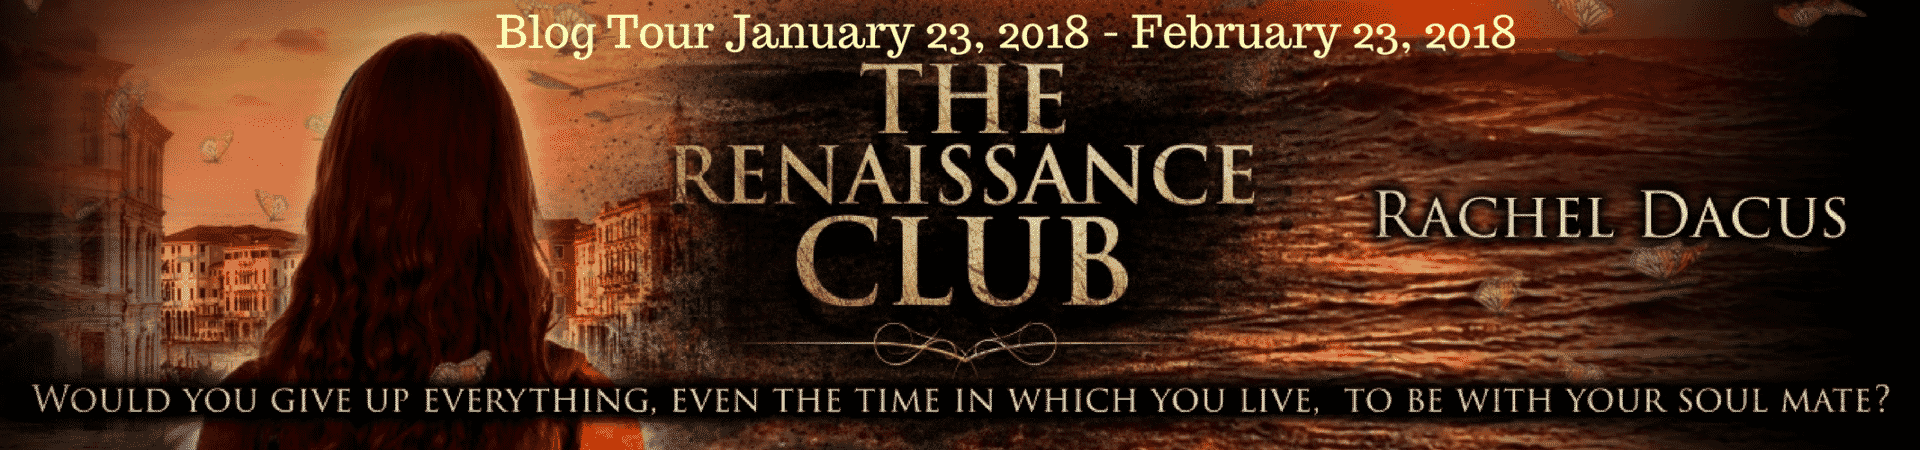 *New Release* The Renaissance Club by Rachel Dacus - Excerpt and Review